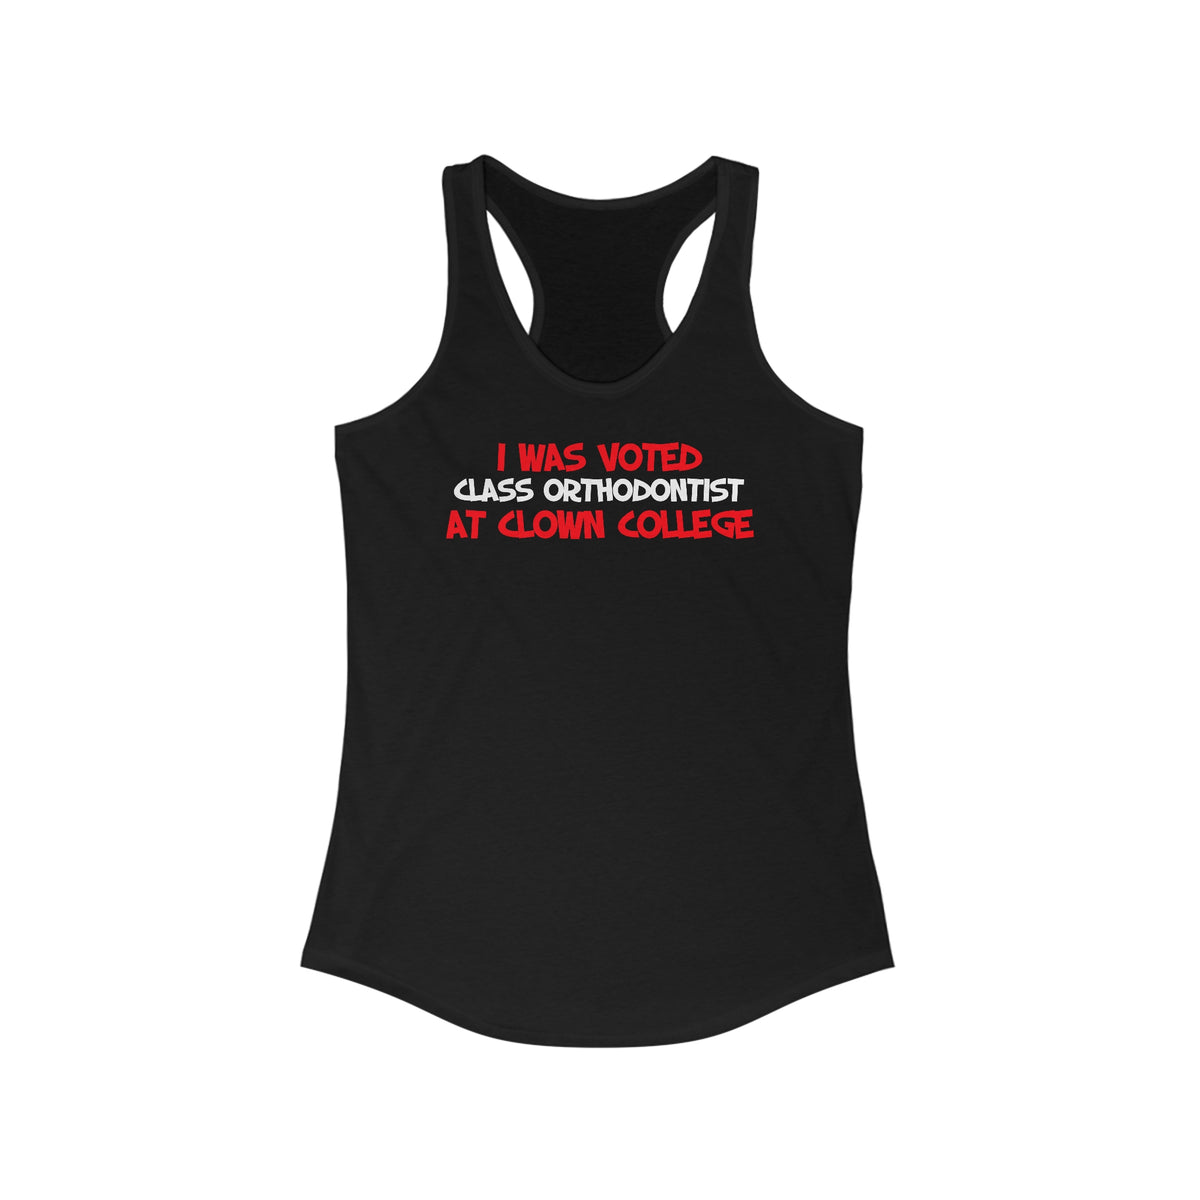 I Was Voted Class Orthodontist At Clown College - Women’s Racerback Tank